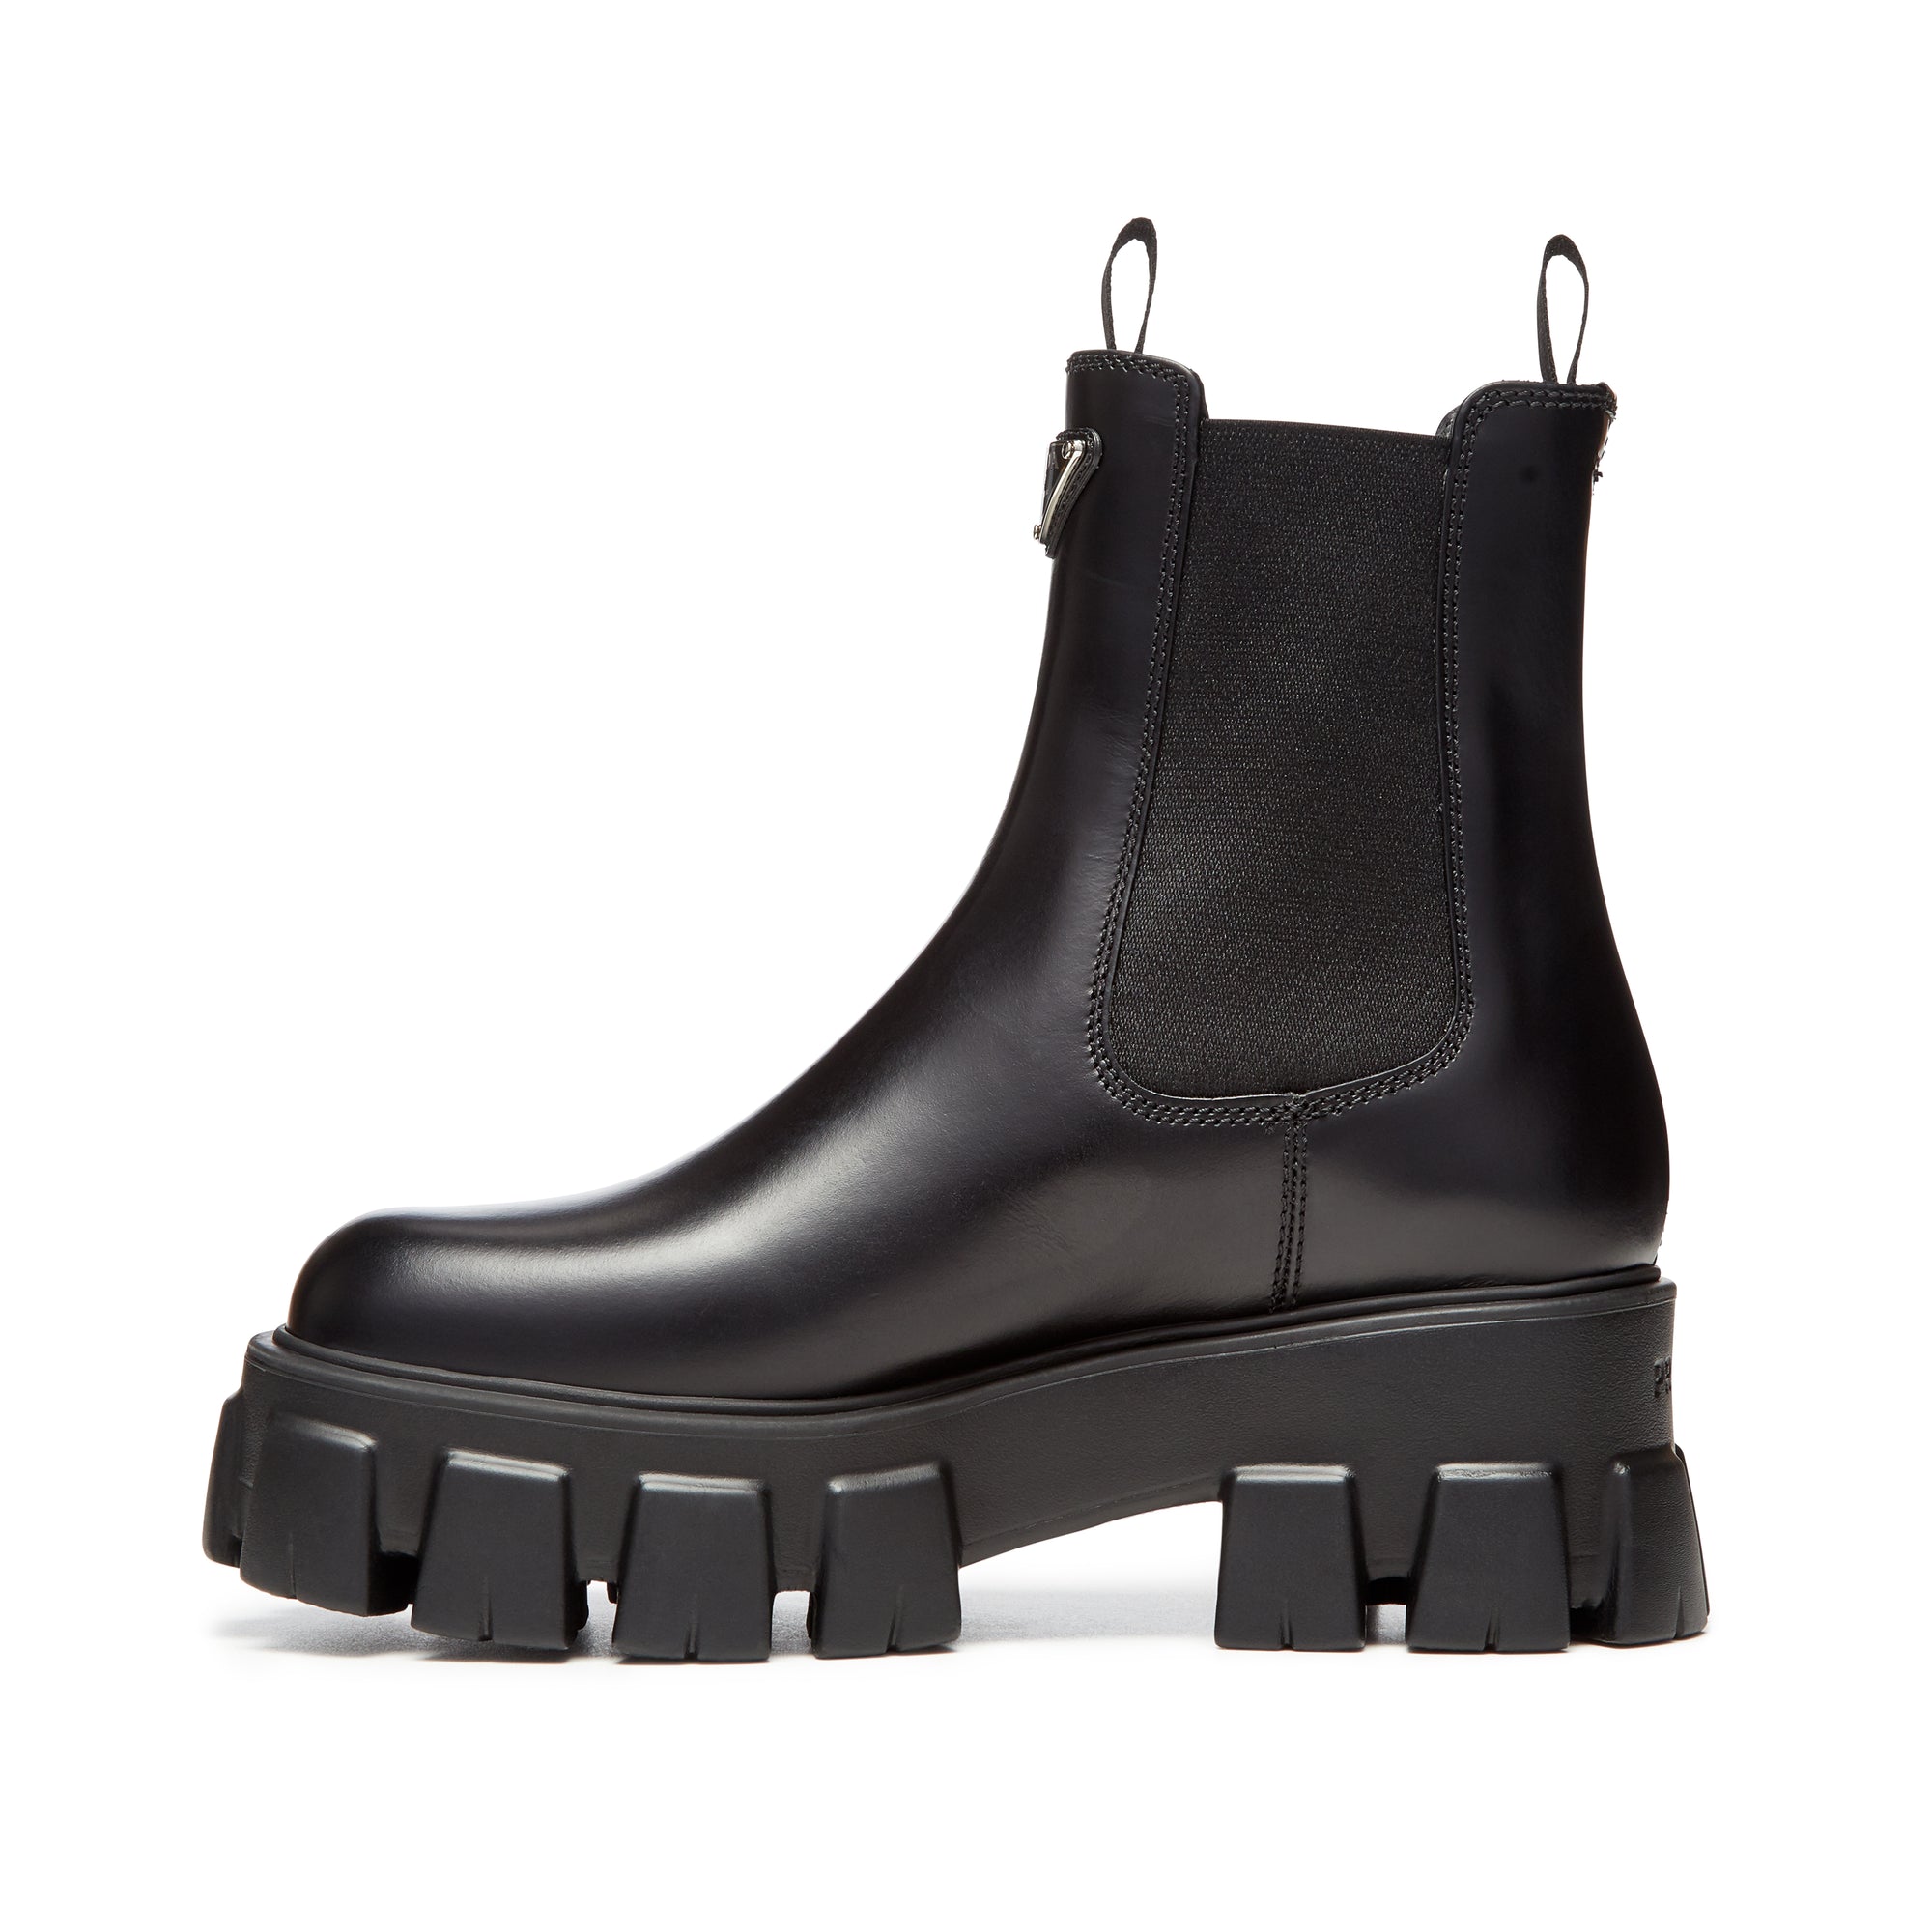 Prada - Women's Monolith Brushed Leather Booties - (Black) view 2